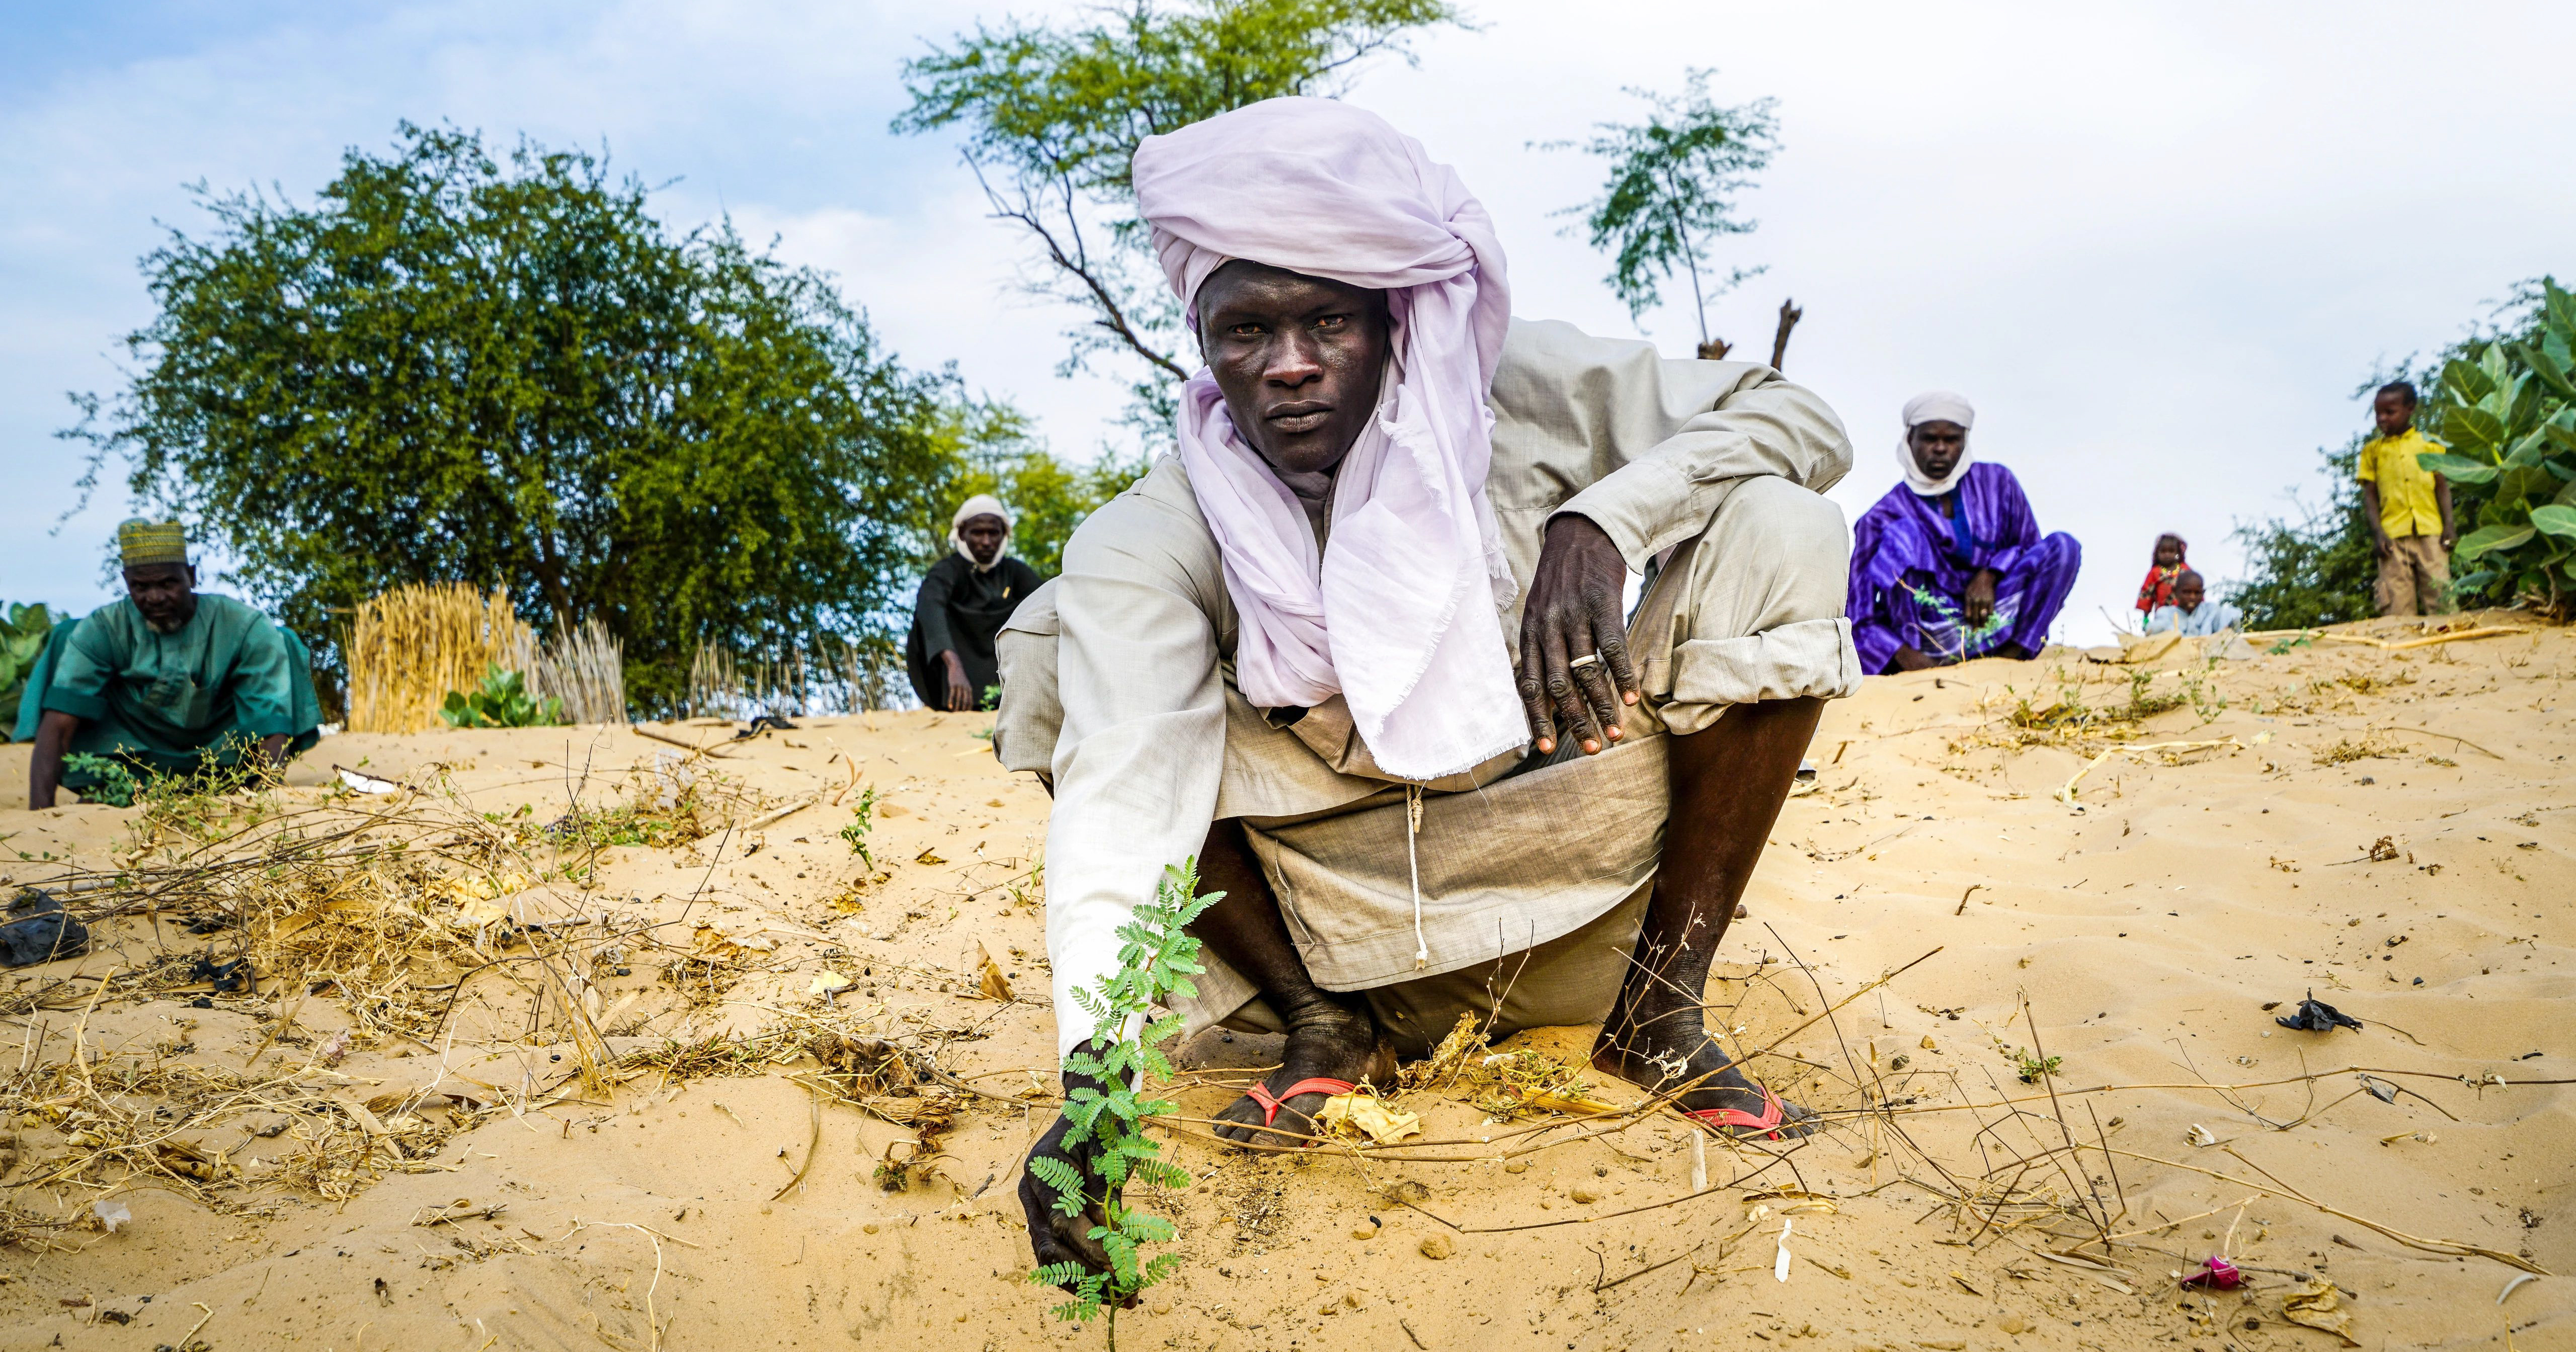 Local communities are fighting against desertification in Lake Chad region.